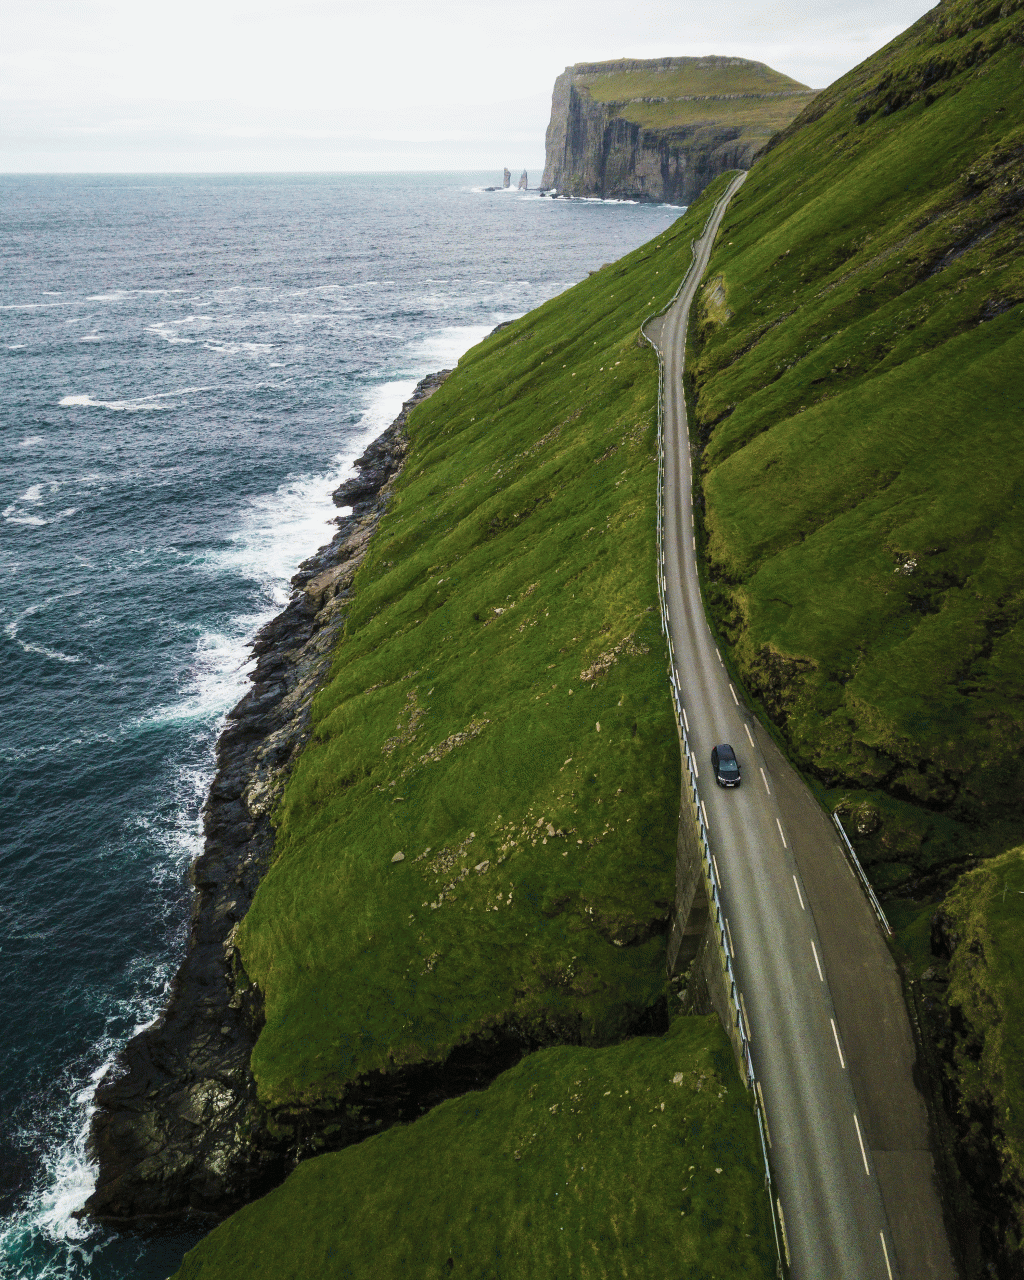 Car driving towards Tjørnuvík in the Faroe Islands. Stunning scenery from above of the shores 6 green hills. Taken by Saviour Mifsud